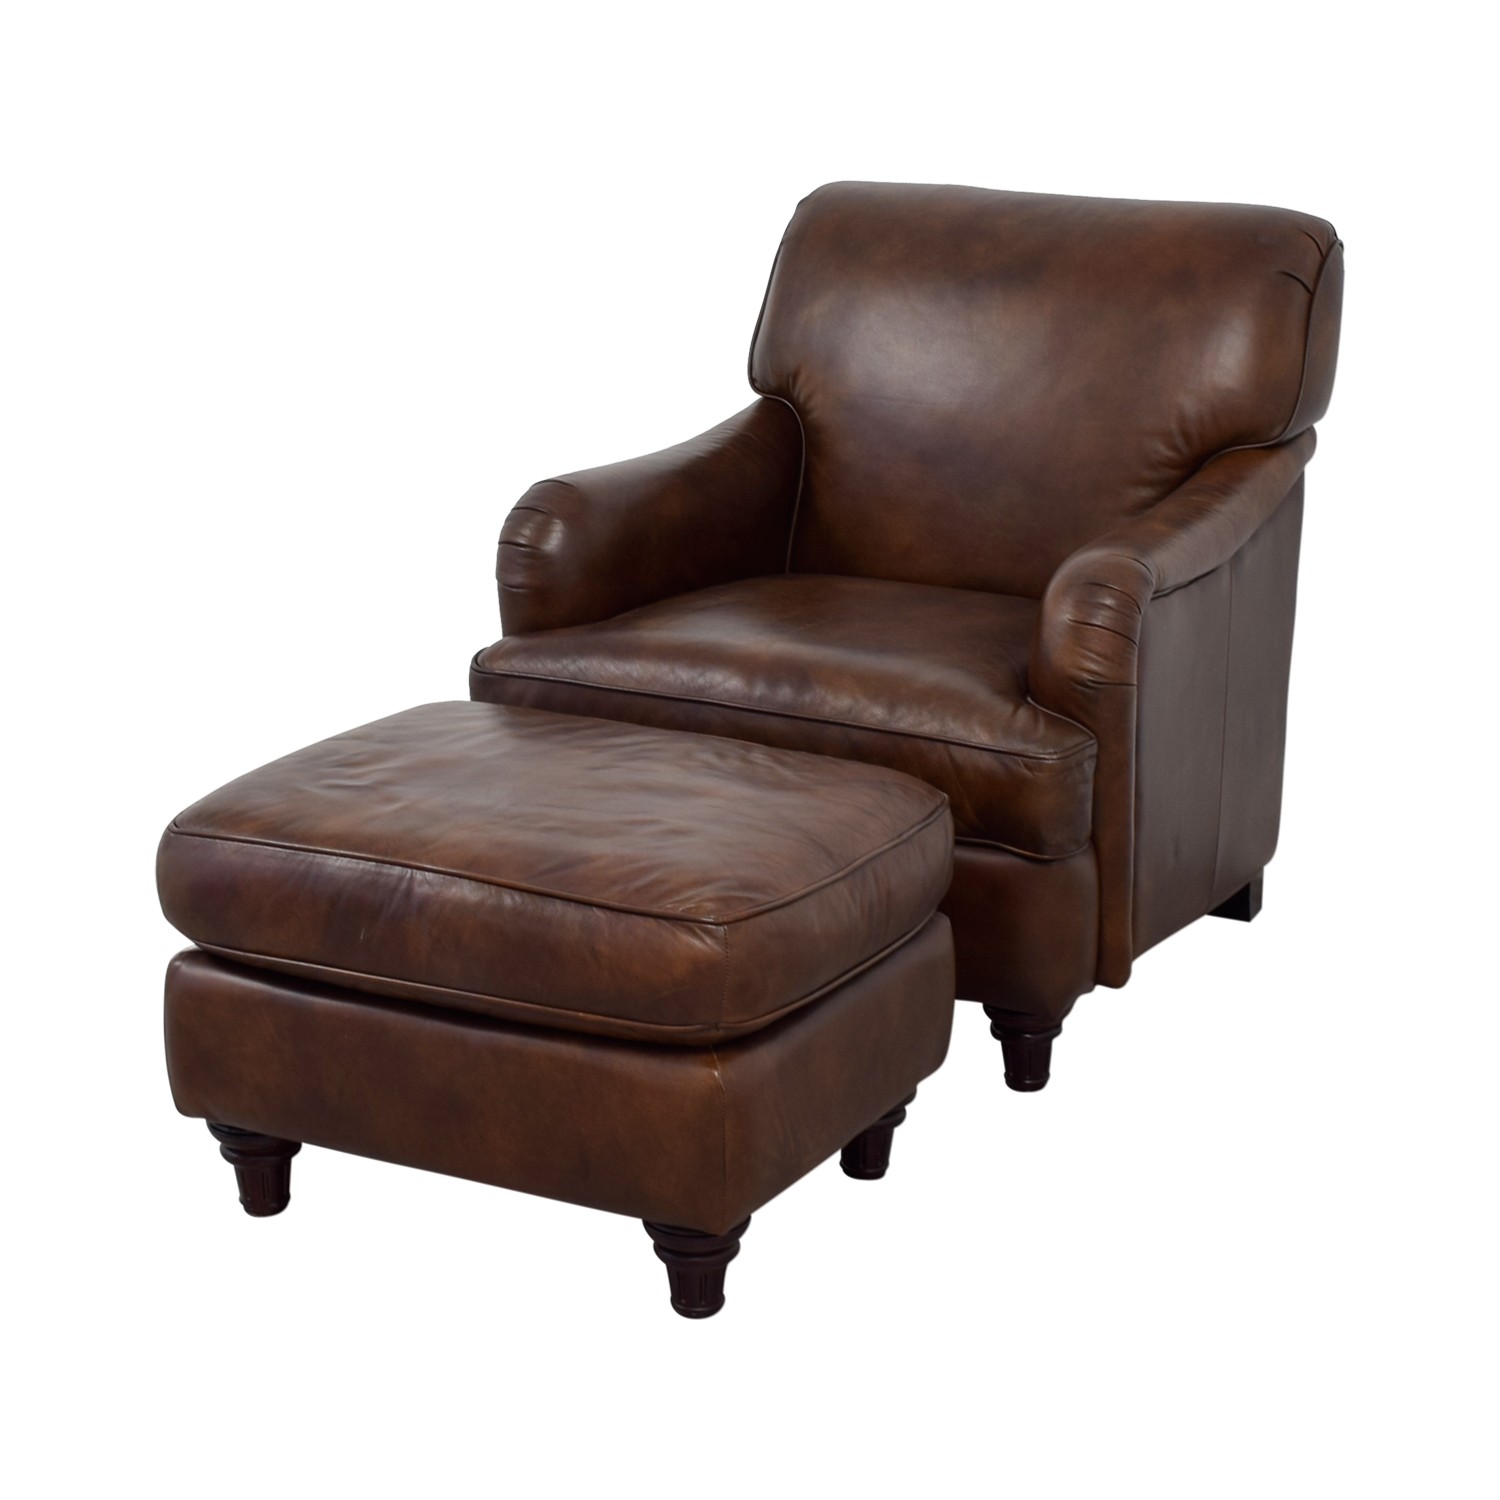 79 off lane leather lane leather chair and ottoman chairs